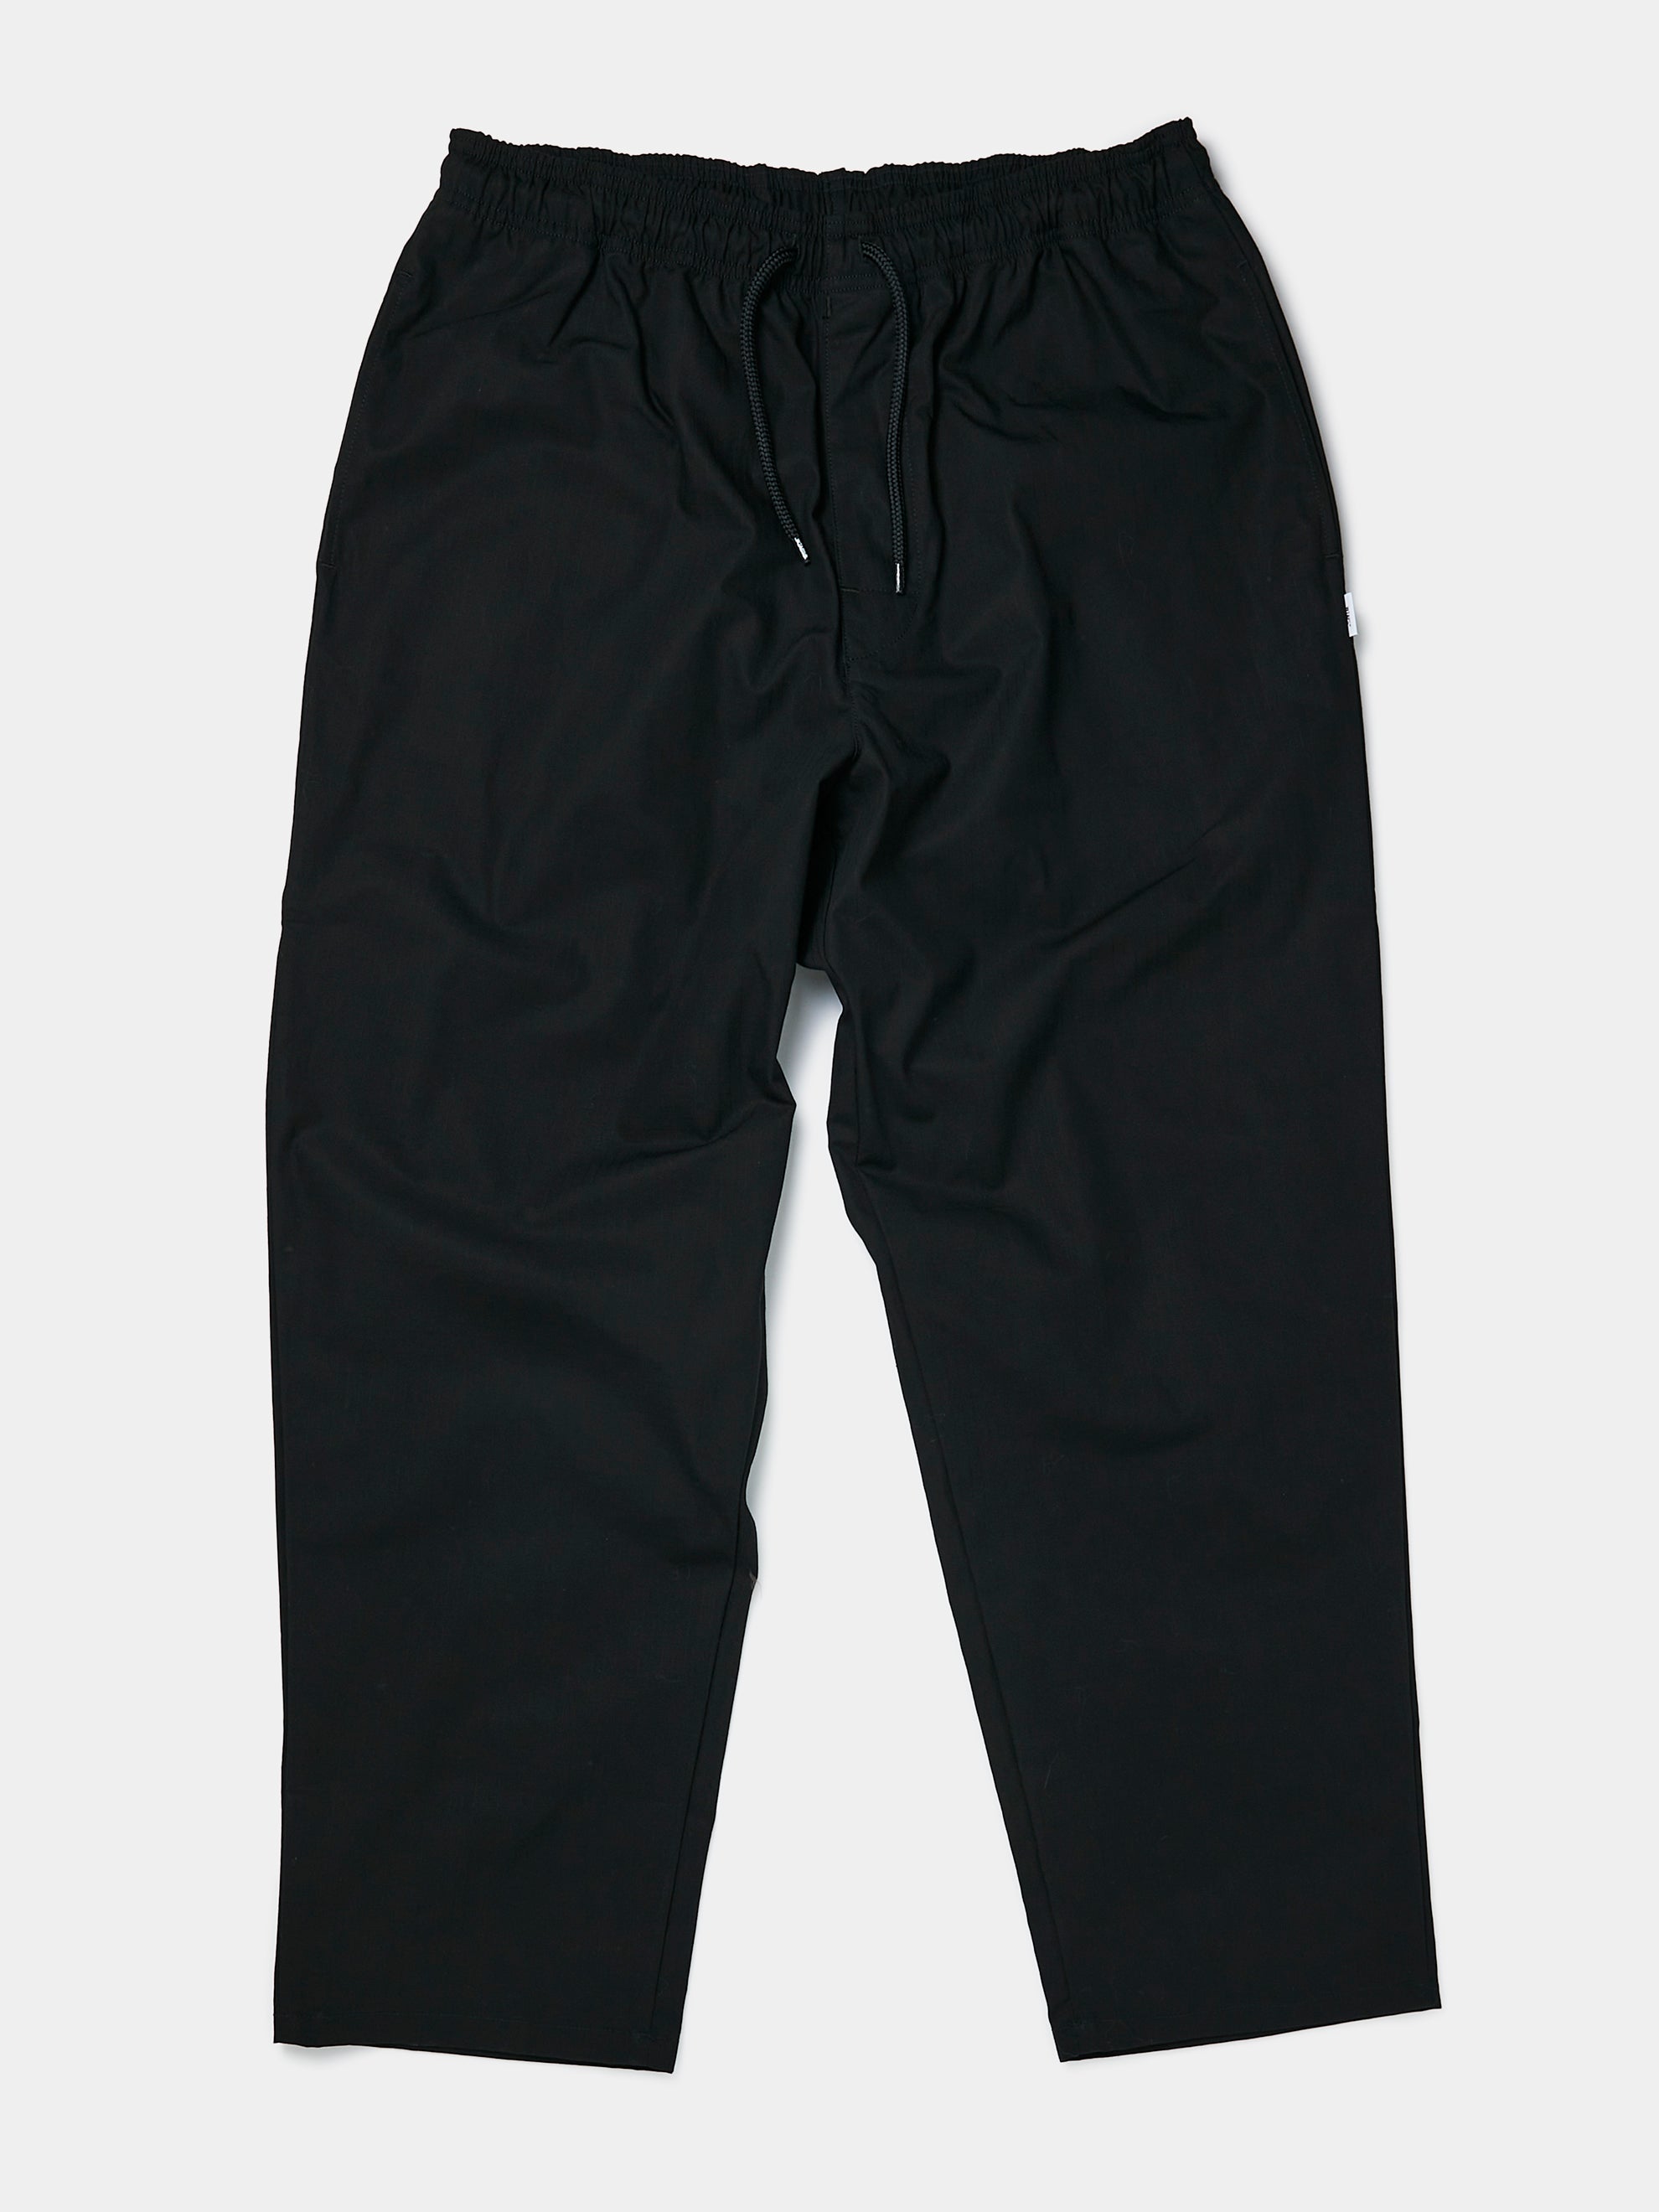 Buy Wtaps SDDT2001 / TROUSERS / COTTON RIPSTOP (BLACK) Online at